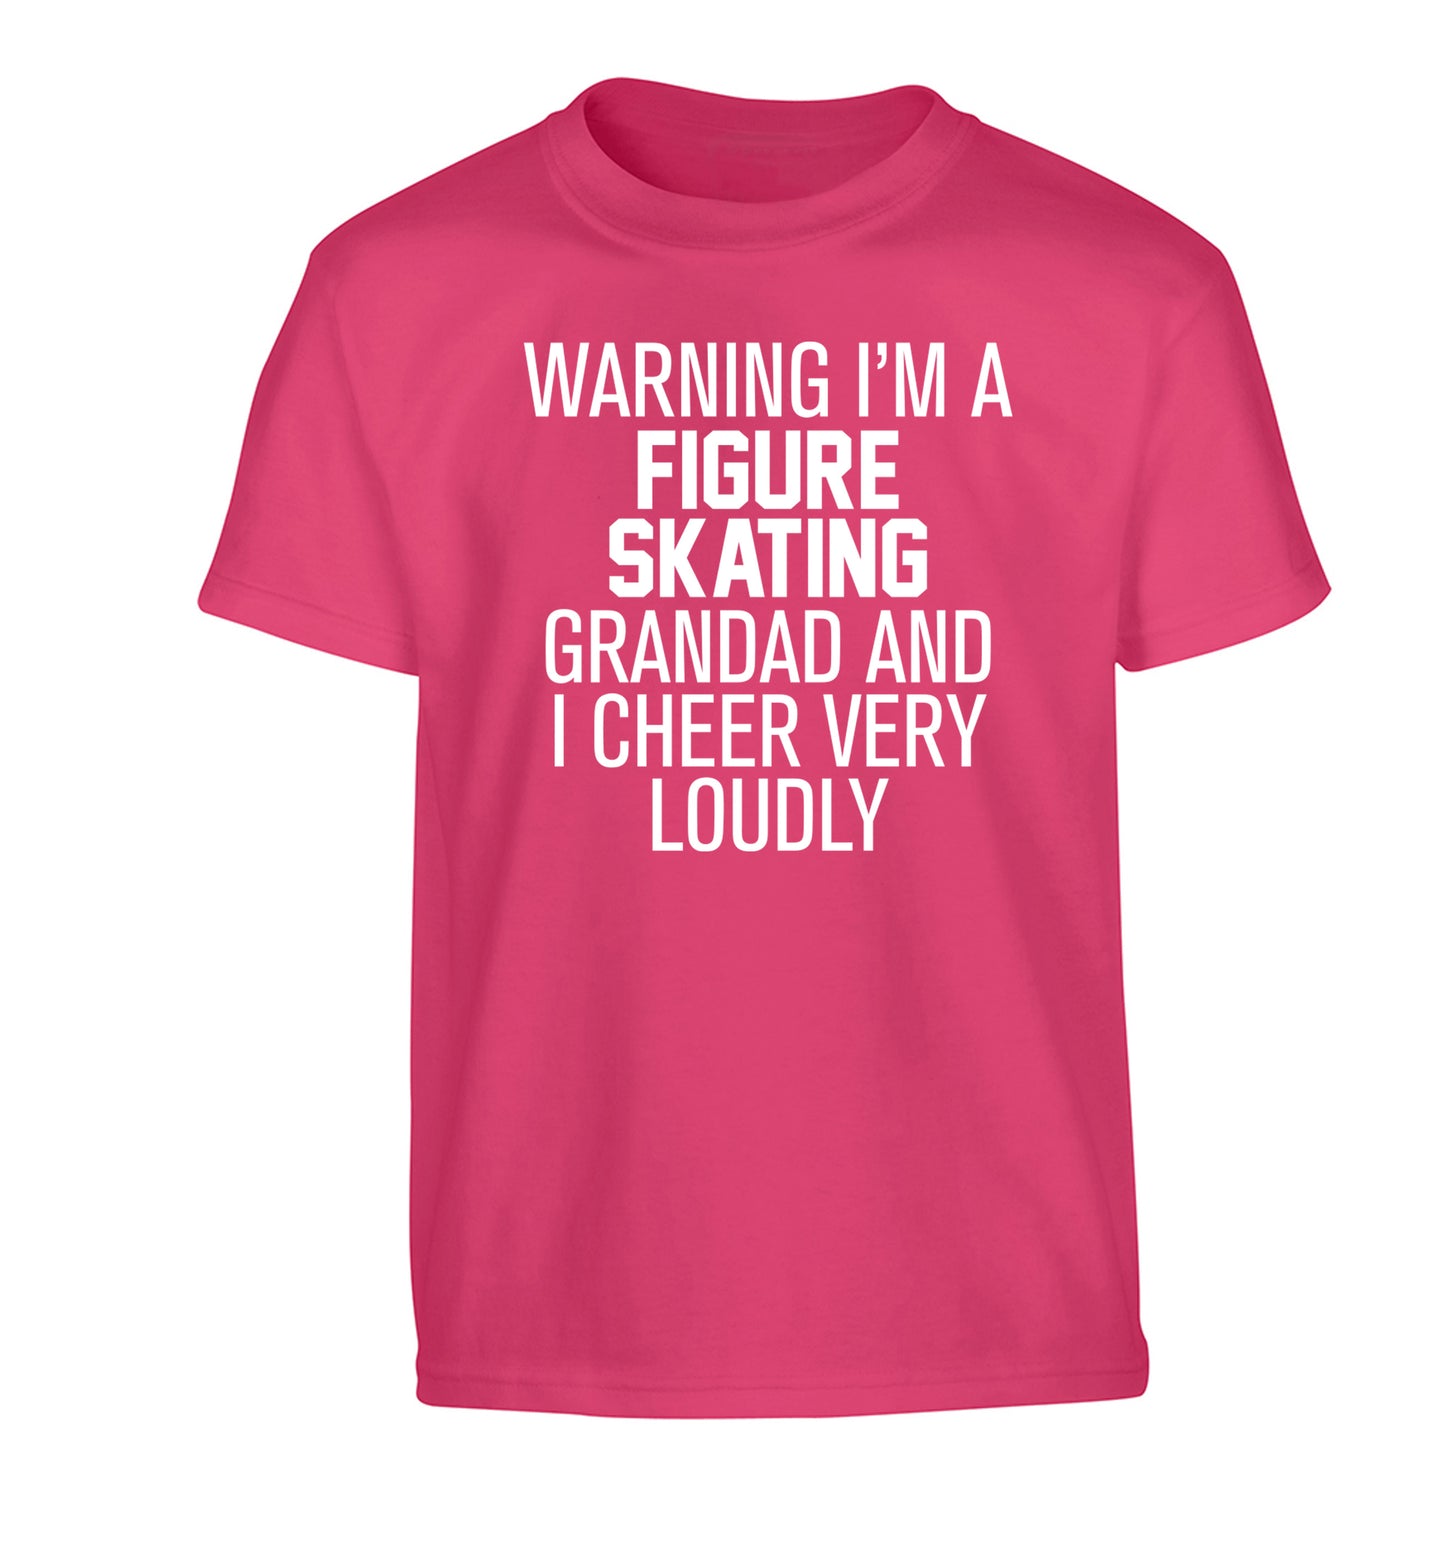 Warning I'm a figure skating grandad and I cheer very loudly Children's pink Tshirt 12-14 Years